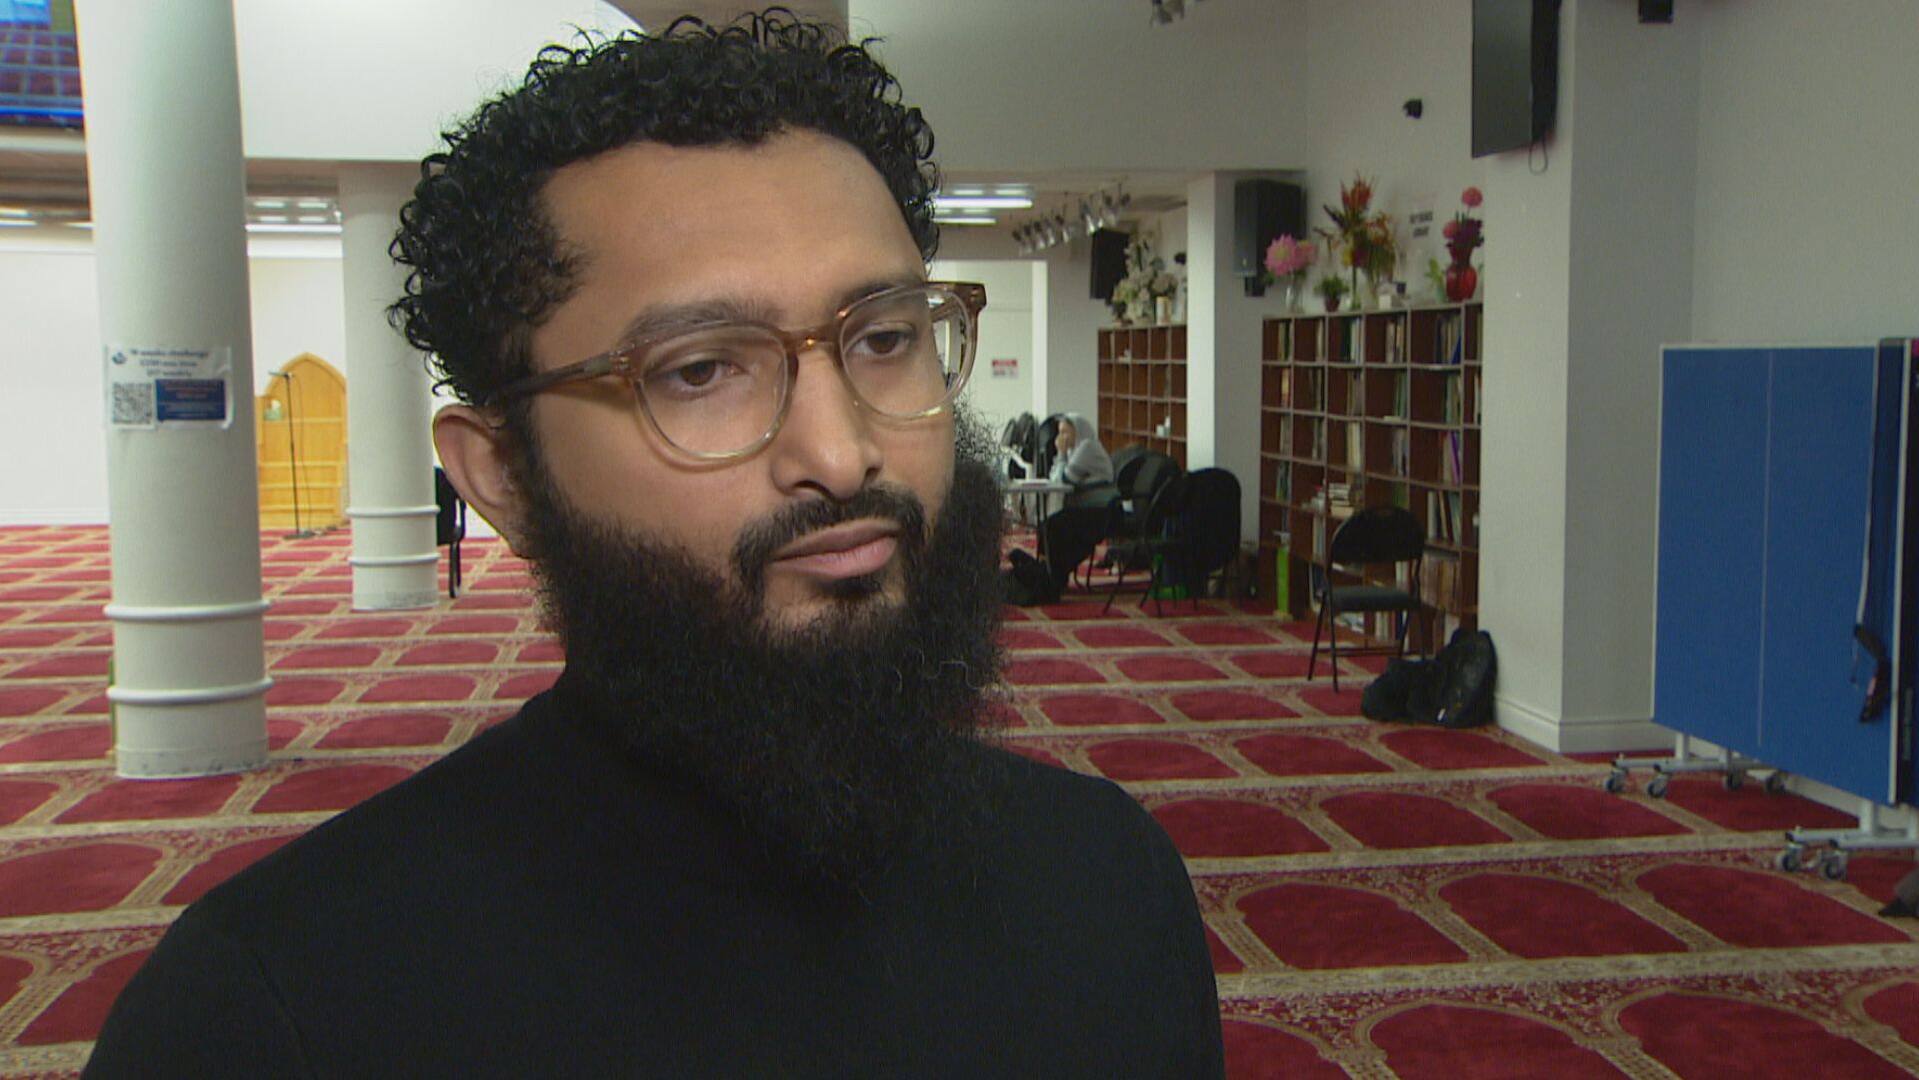 mosque attack victims shaken after hate motivated assaults lead to toronto mans arrest